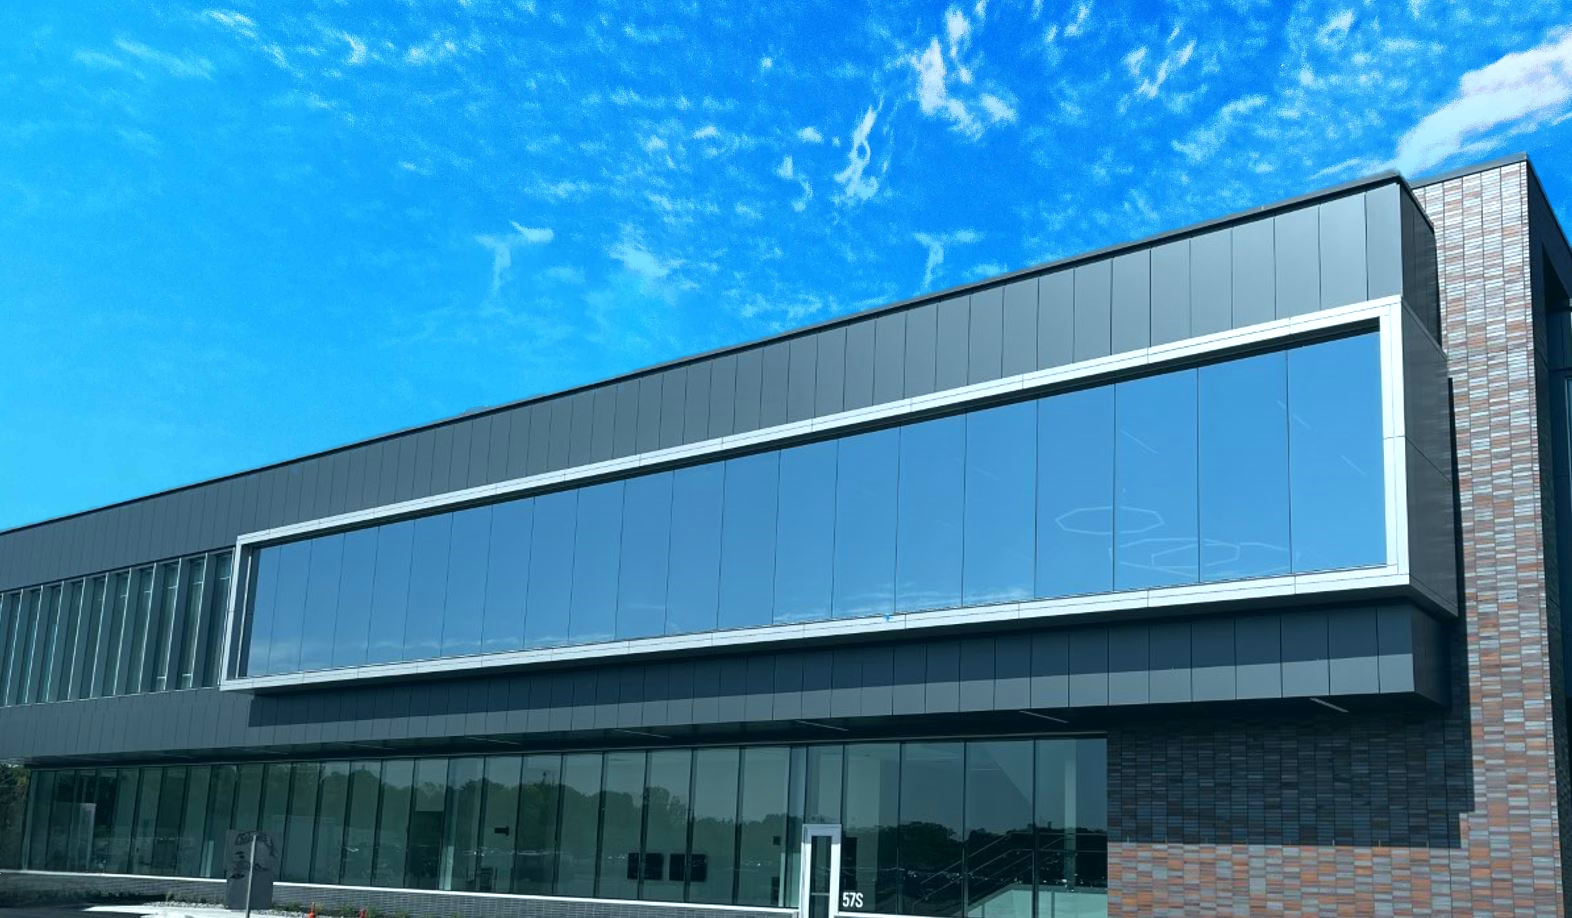 w l hall company The Premier Exterior and Interior Building Systems Provider in the Upper Midwest boston scientific glass & glazing 5